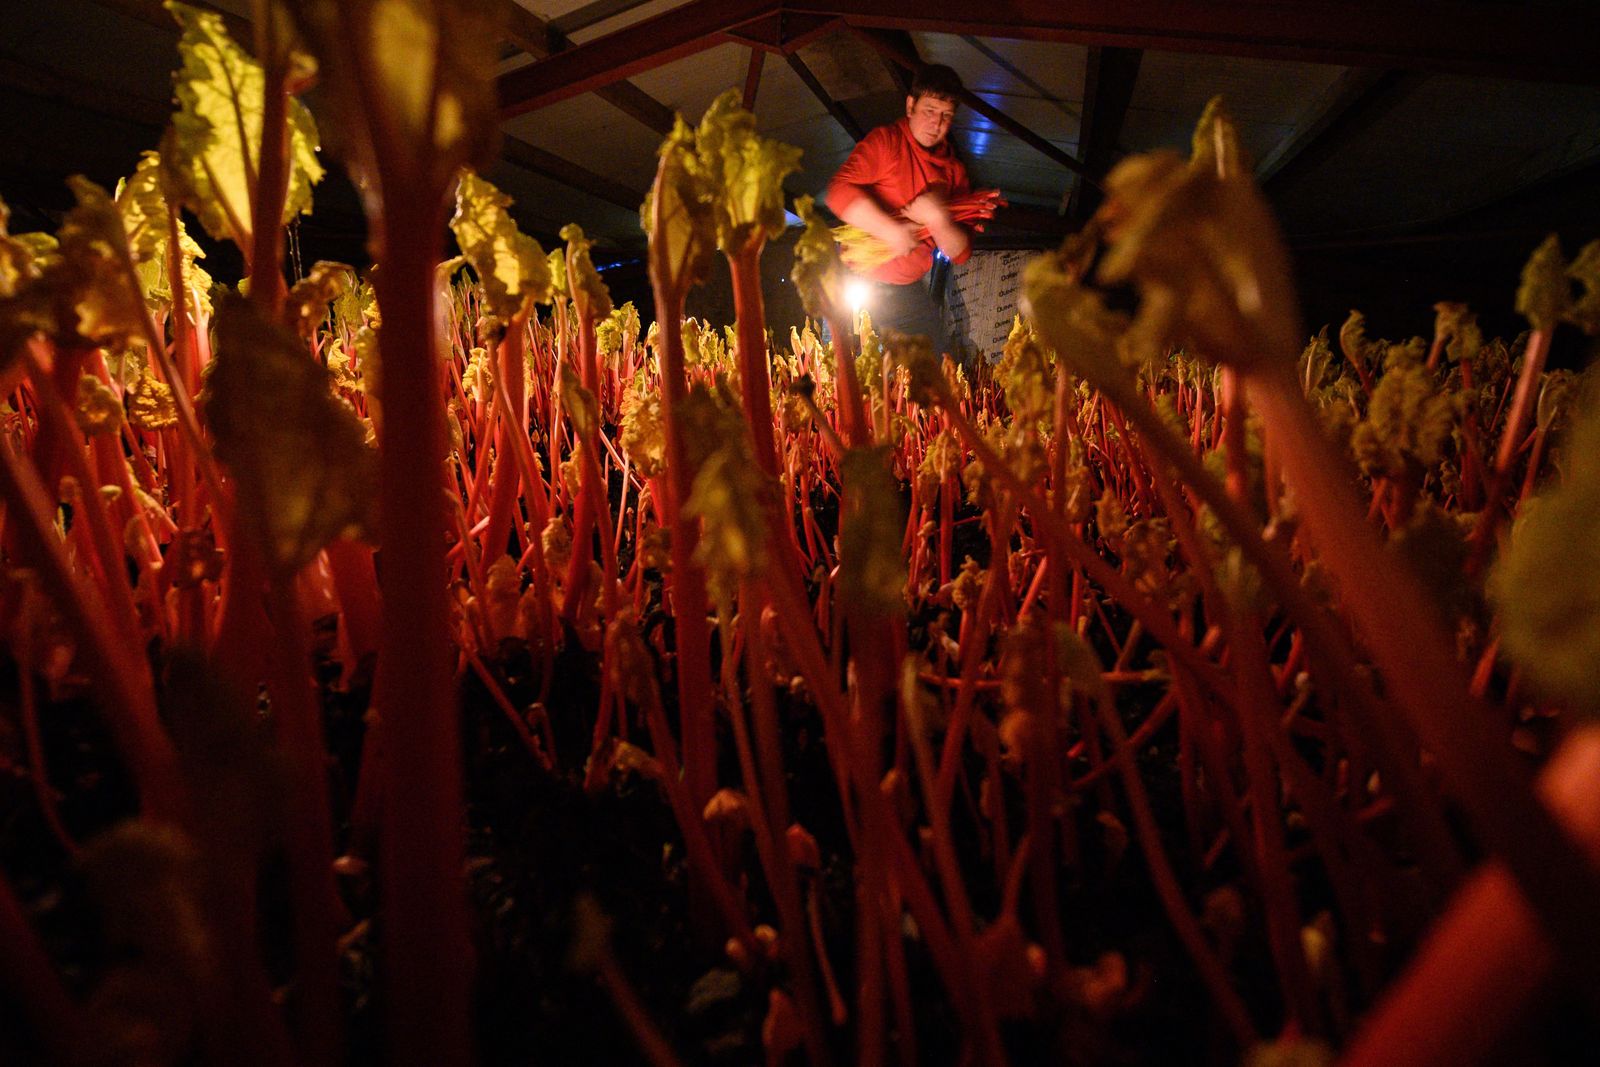 The English Farmers Who Harvest Rhubarb by Candlelight